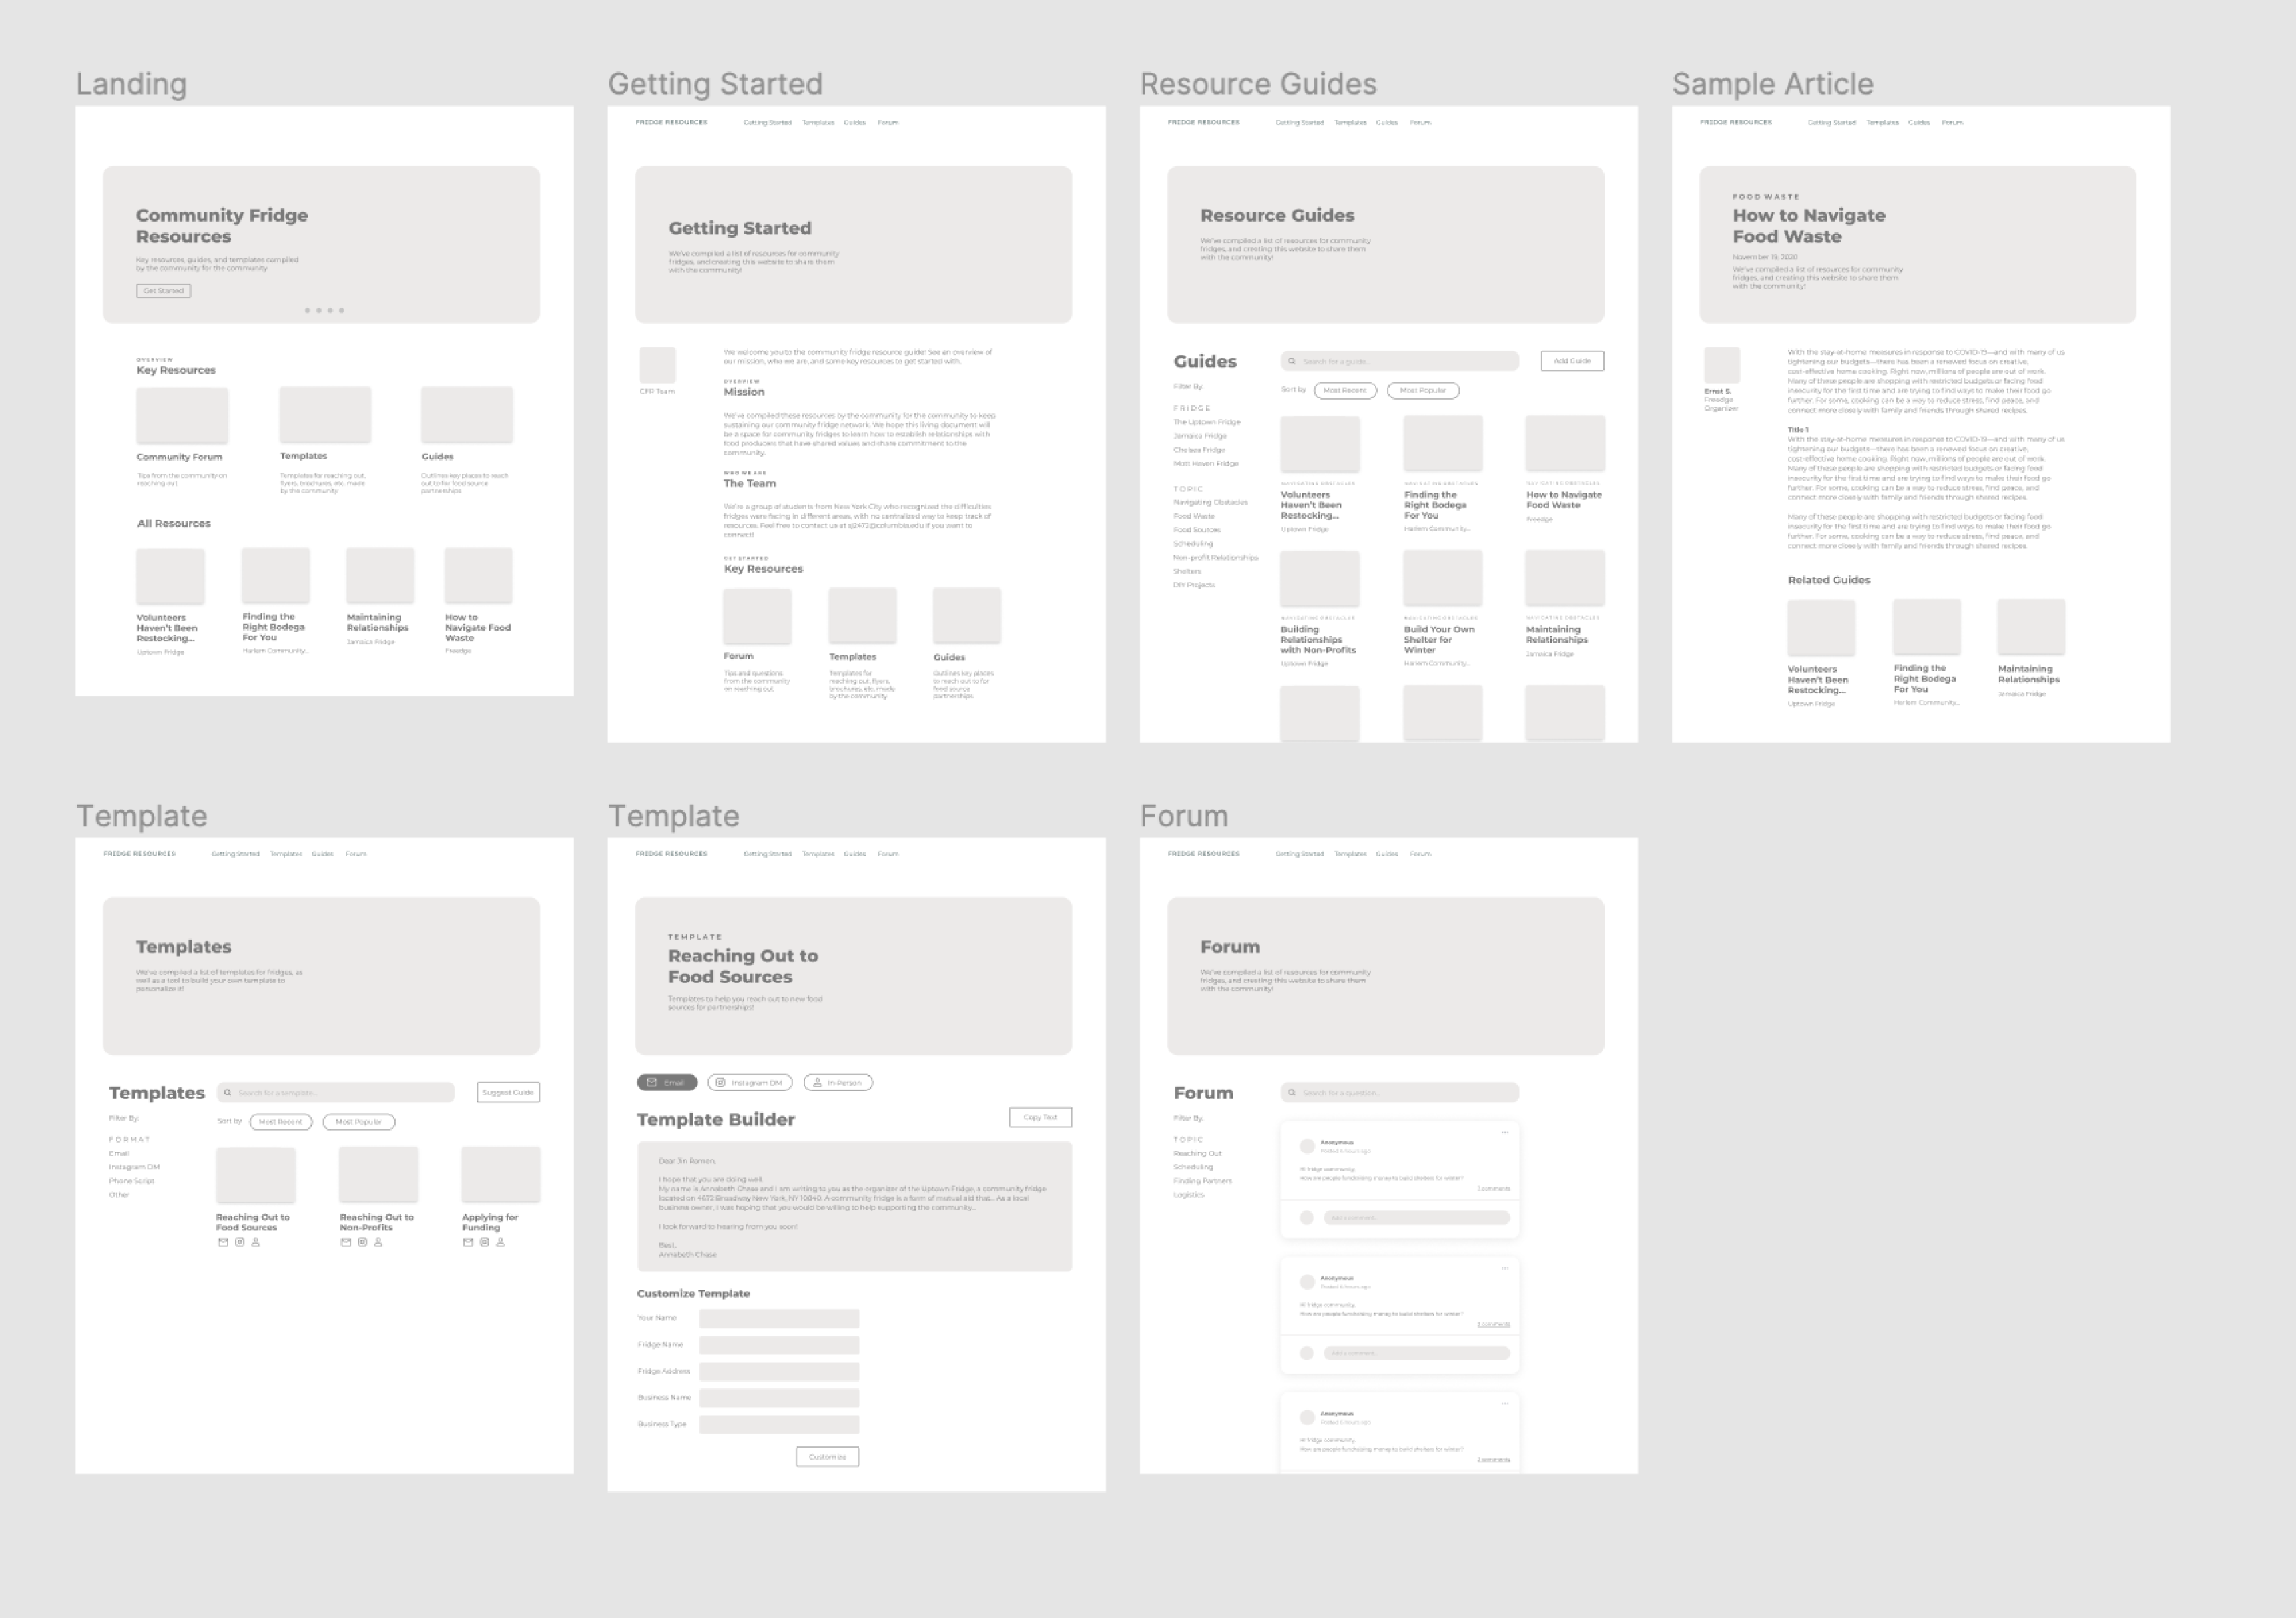 Medium Fidelity Prototype: Figma wireframes of each page without color